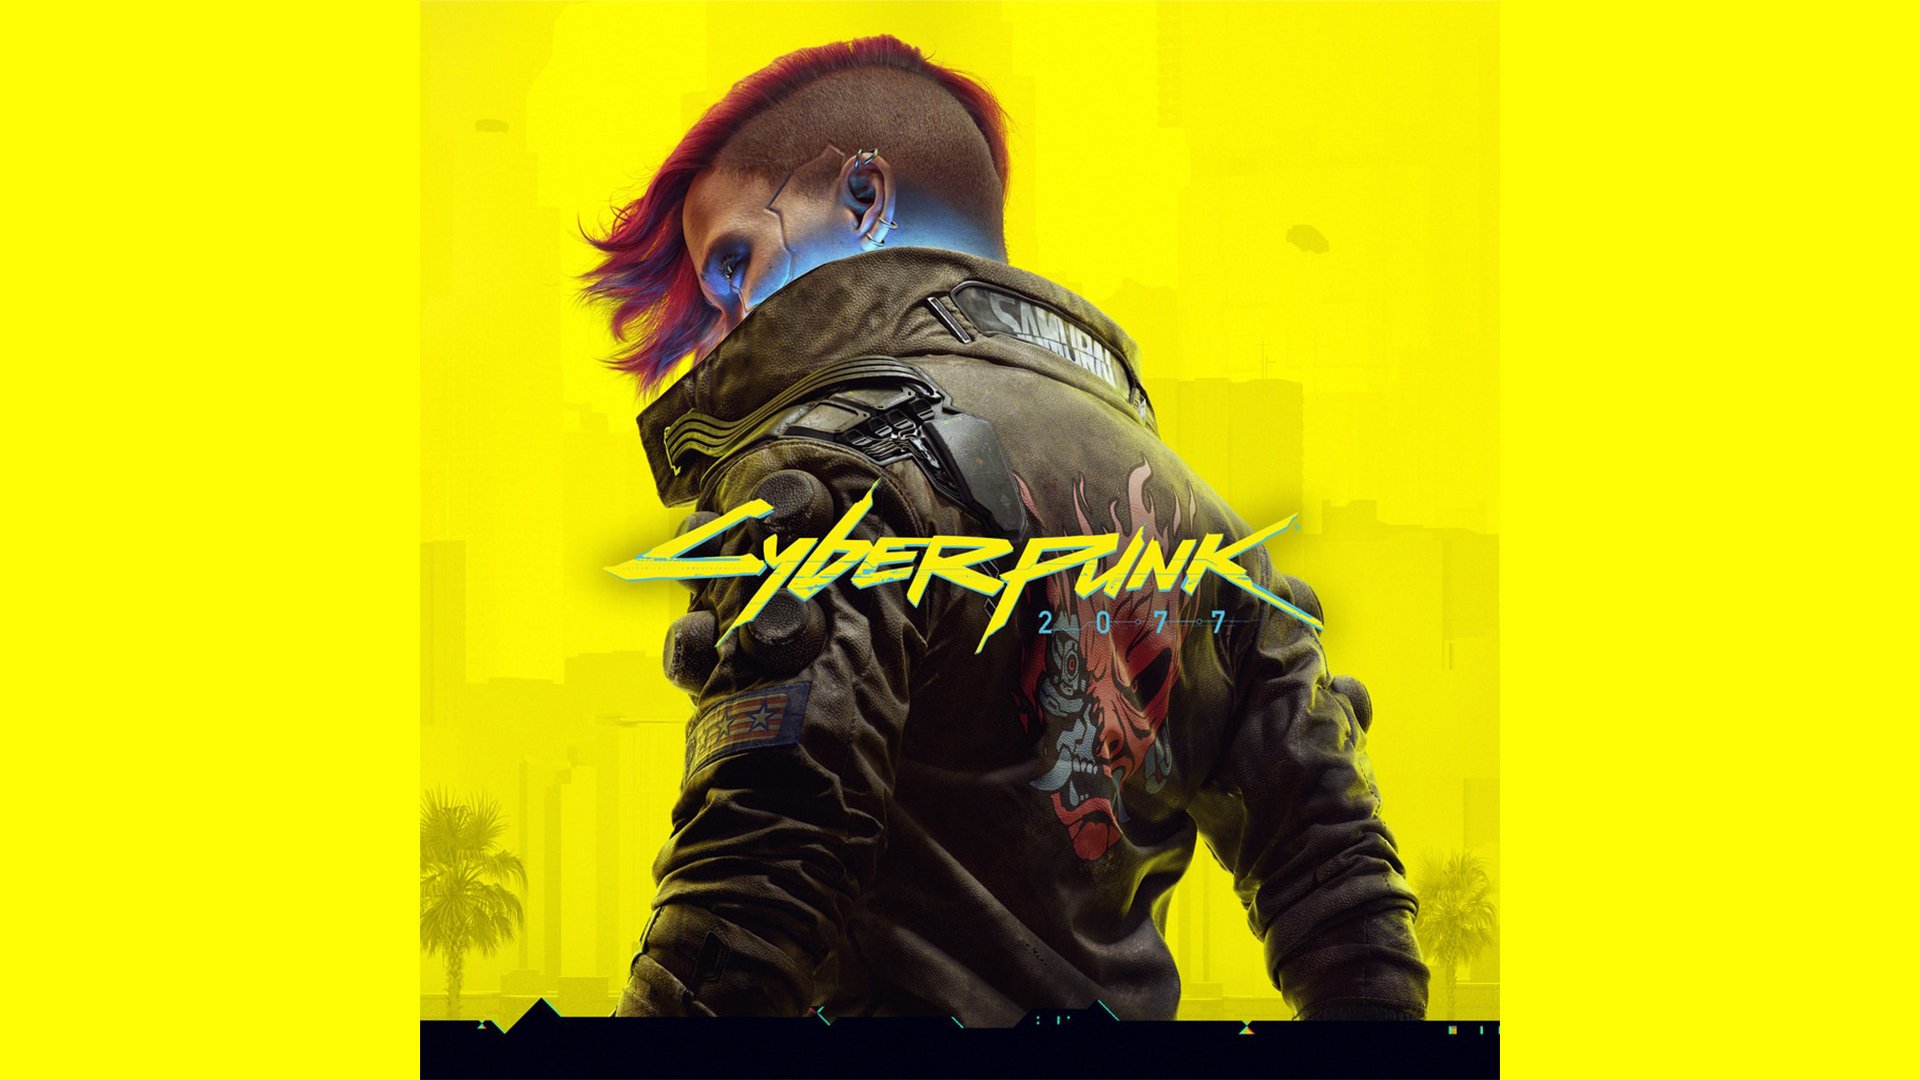 PS5 version of Cyberpunk 2077 seemingly spotted on PSN, hinting at imminent  release